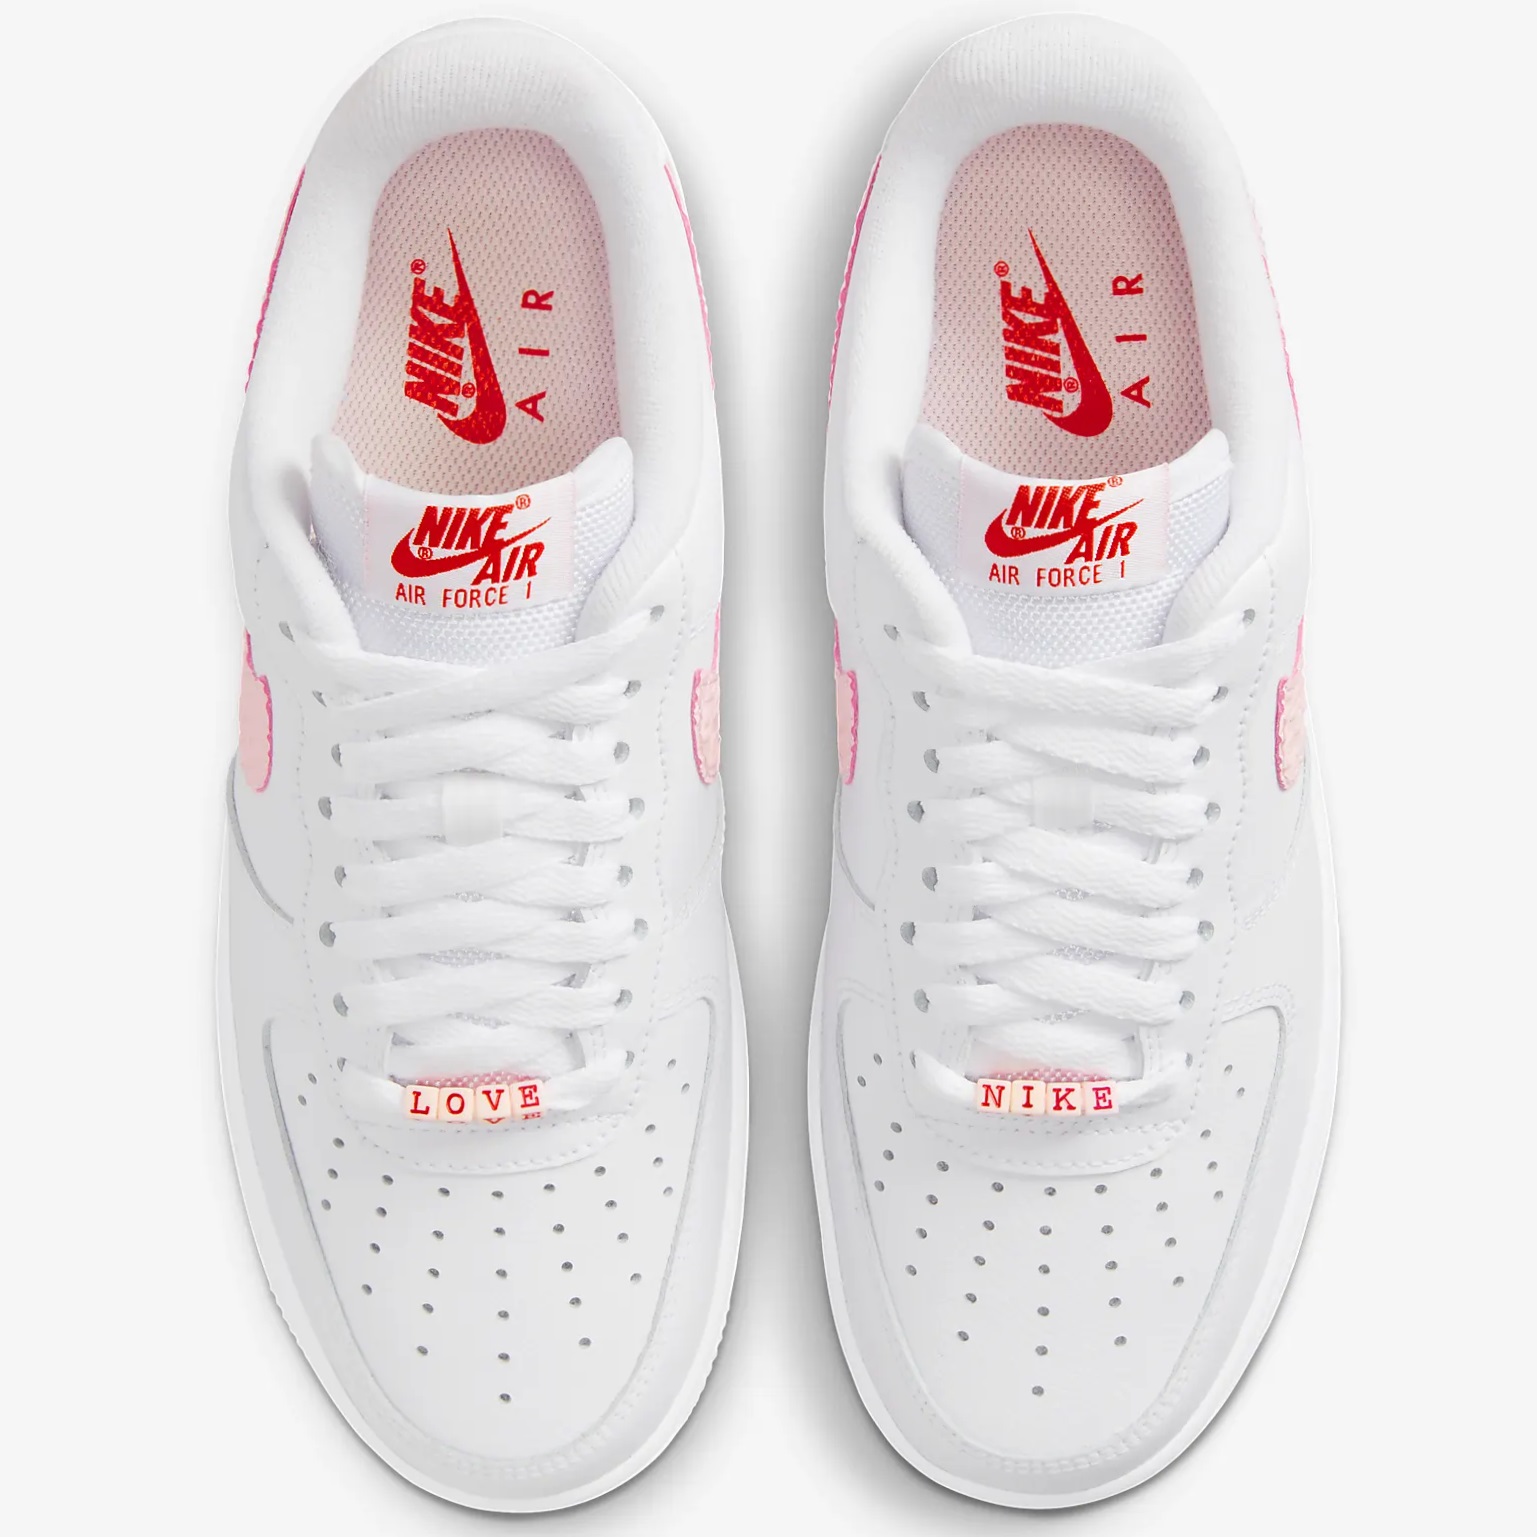 GIÀY THỂ THAO NỮ NIKE AIR FORCE 1 07 LOW VD VALENTINE´S DAY WHITE ATMOSPHERE UNIVERSITY RED SAIL DQ9320-100 1